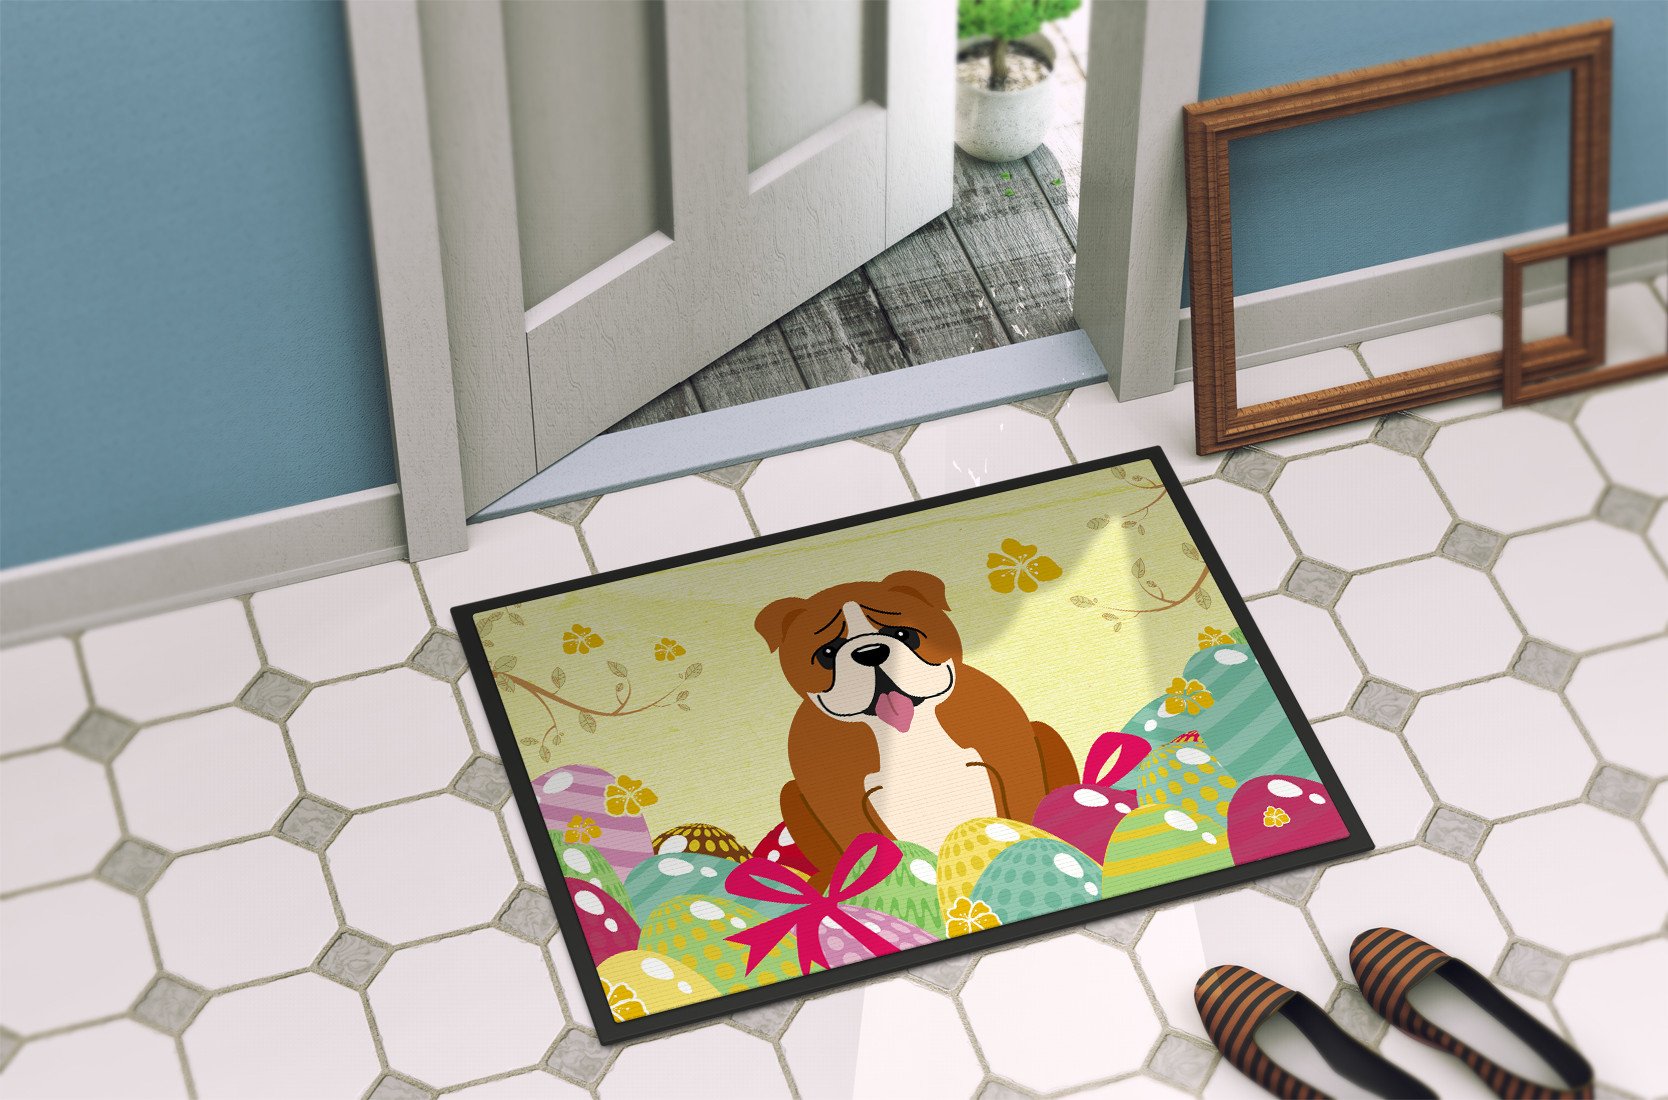 Easter Eggs English Bulldog Red White Indoor or Outdoor Mat 24x36 BB6120JMAT by Caroline's Treasures